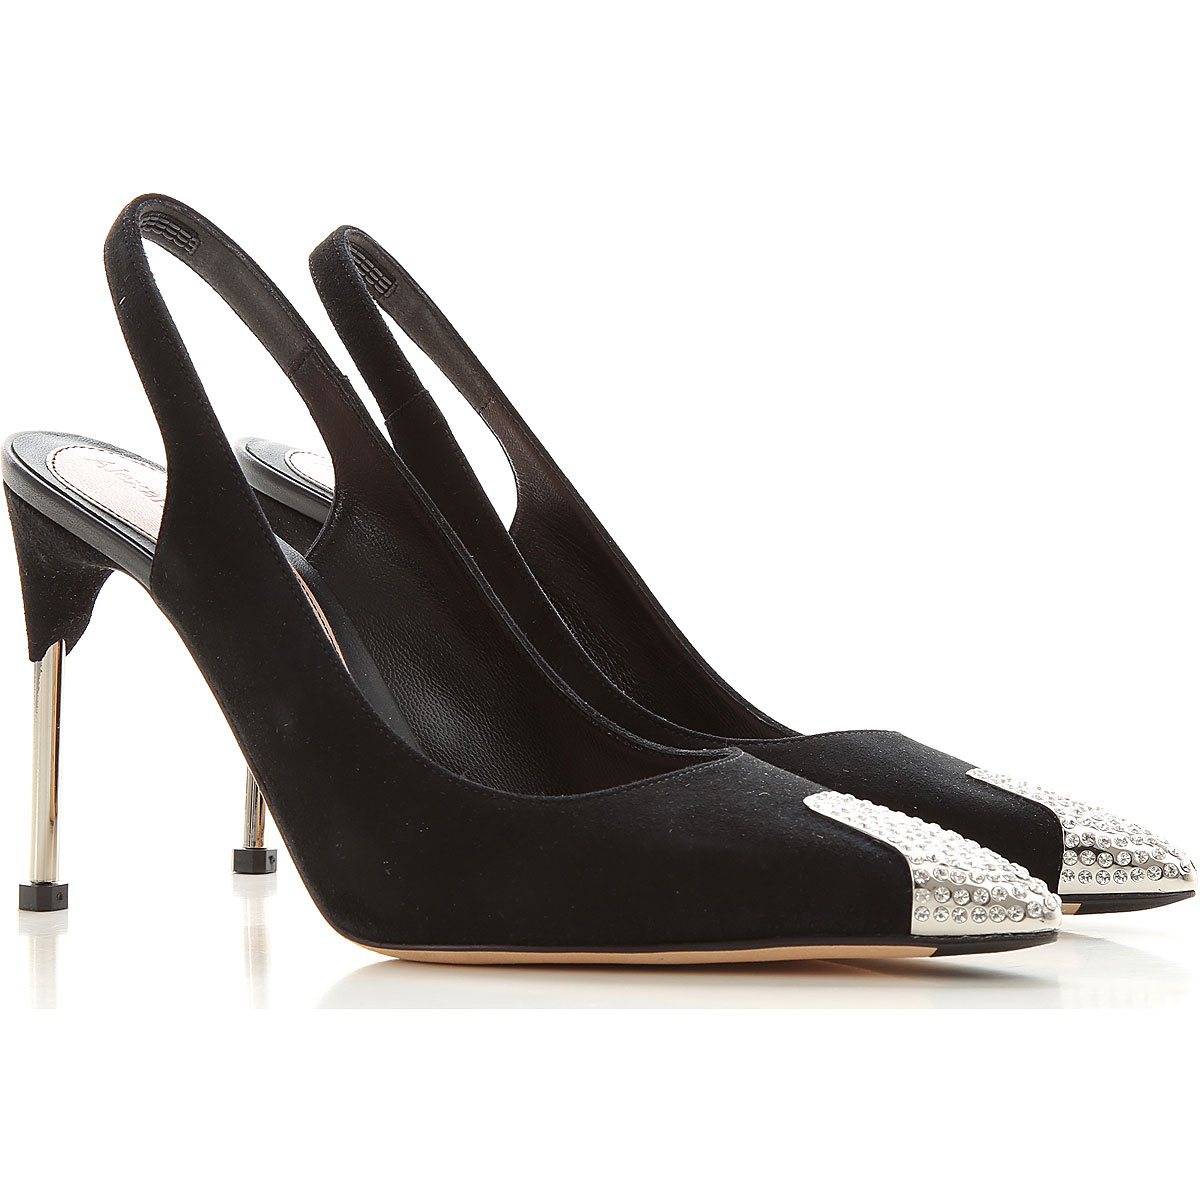 Womens Shoes Alexander McQueen, Style code: 633500-whr72-1081